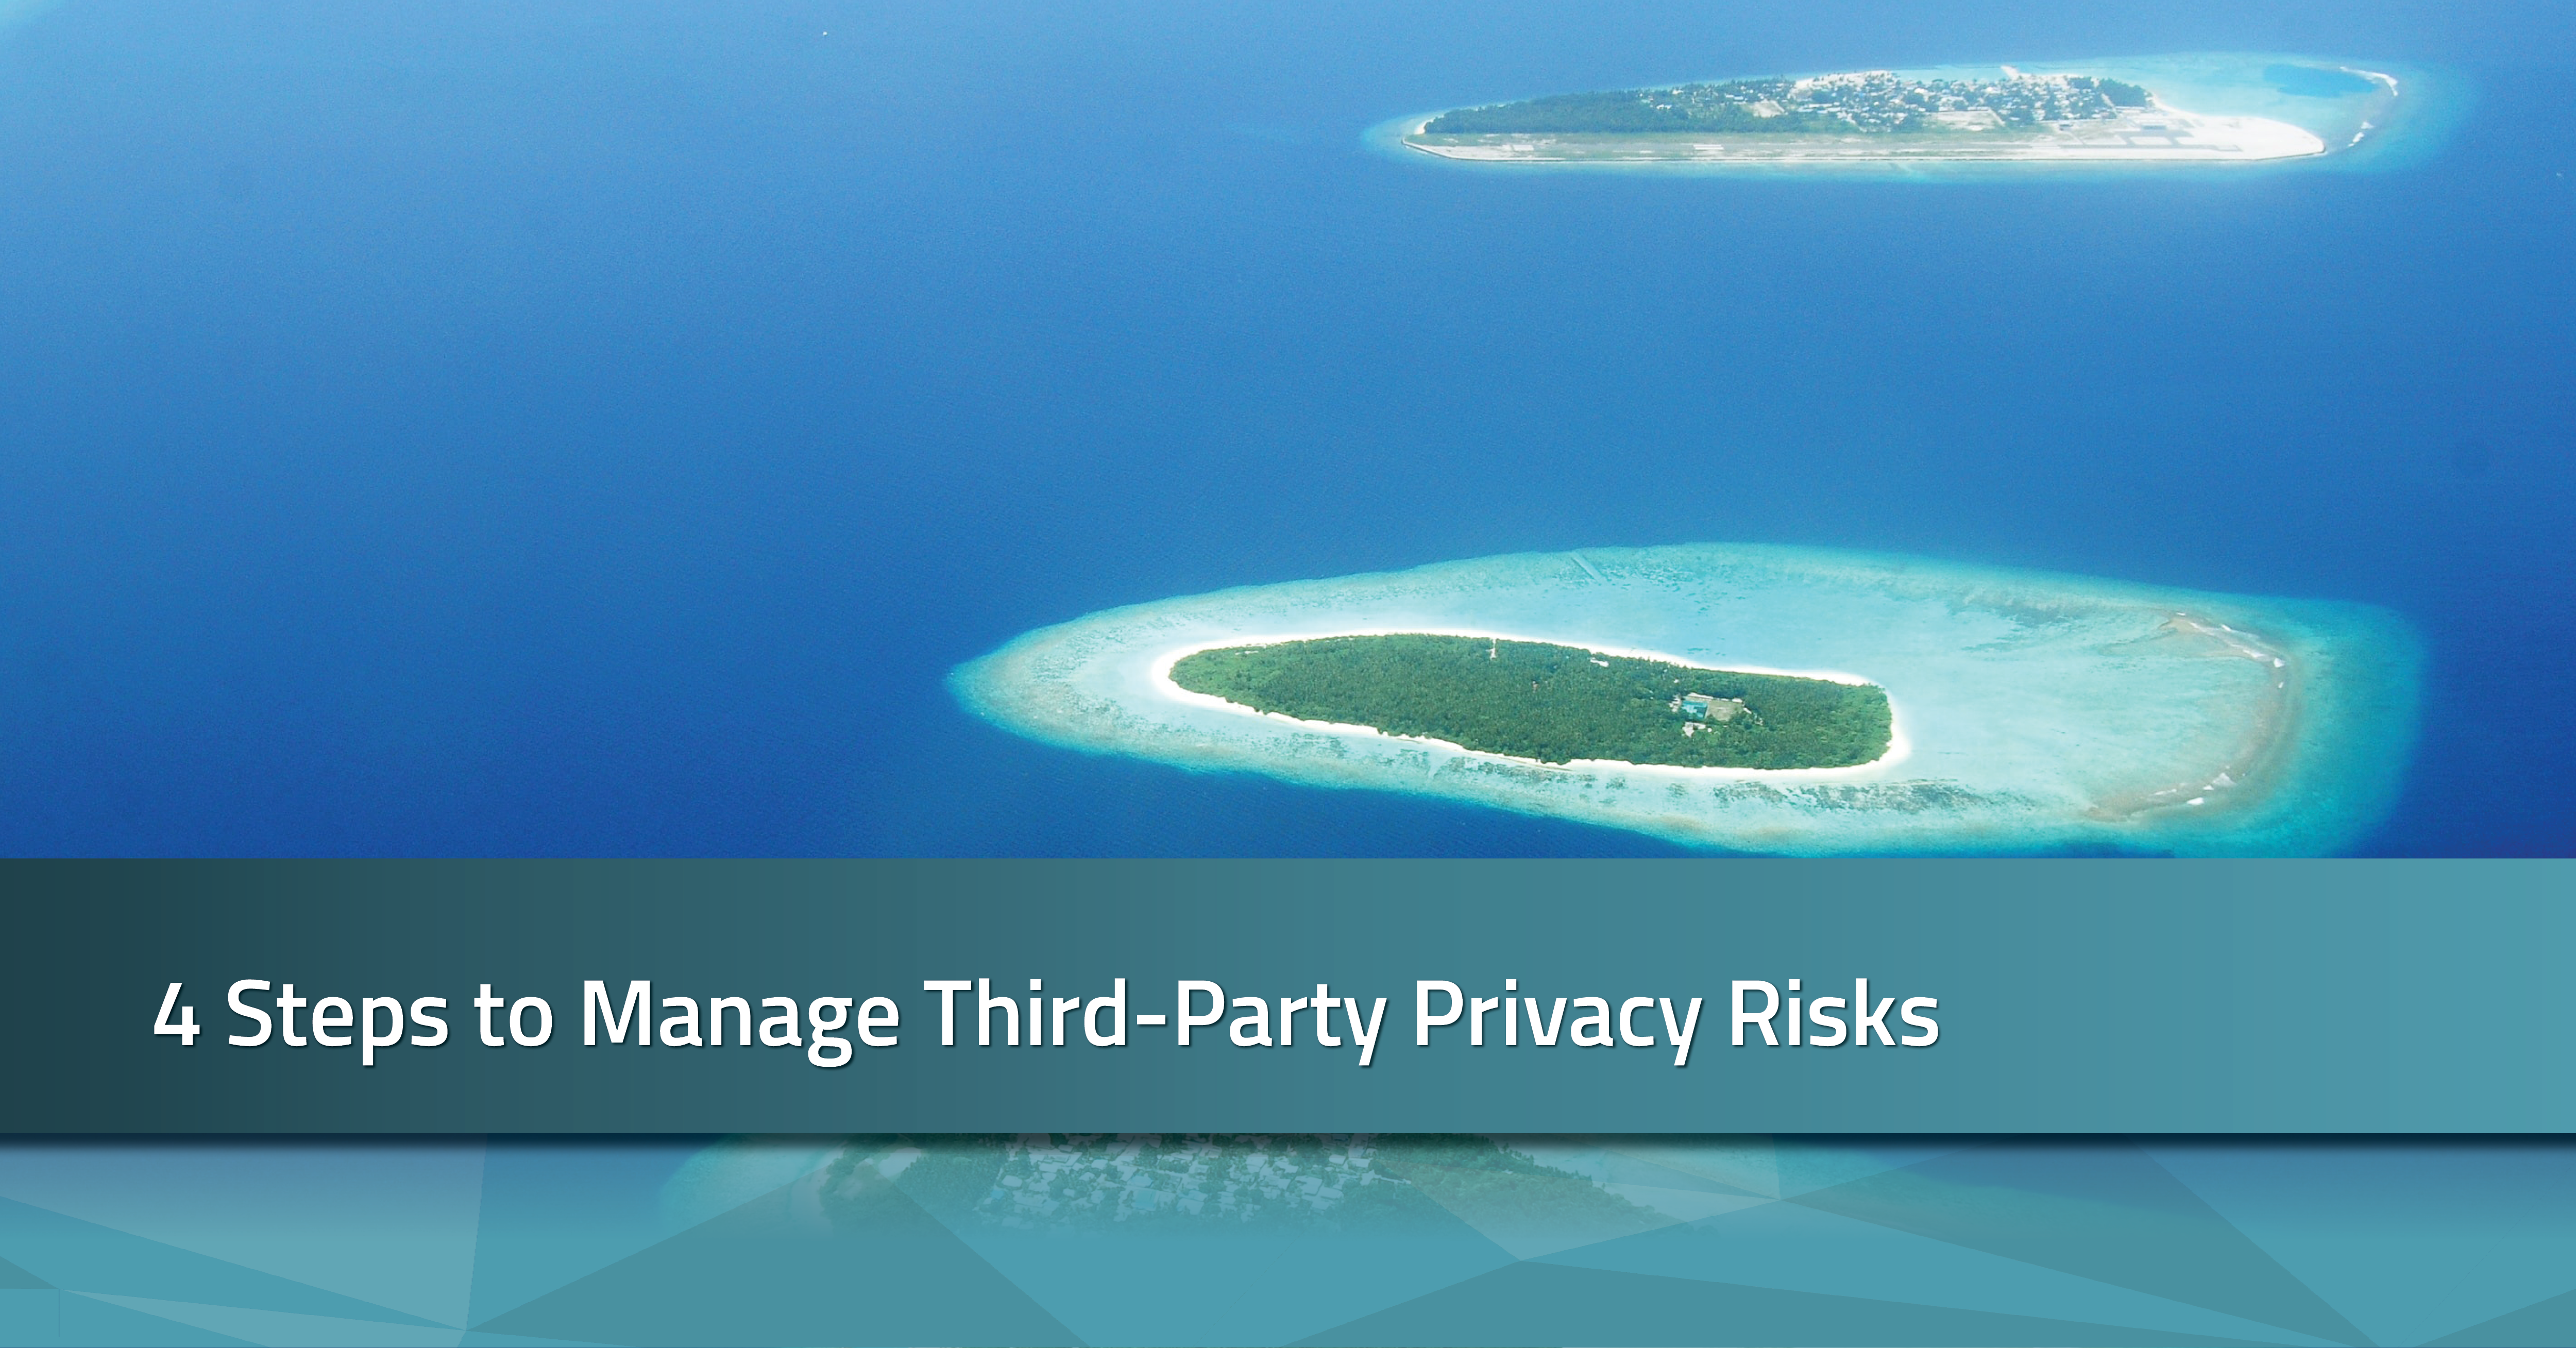 third-party privacy risks | radarfirst